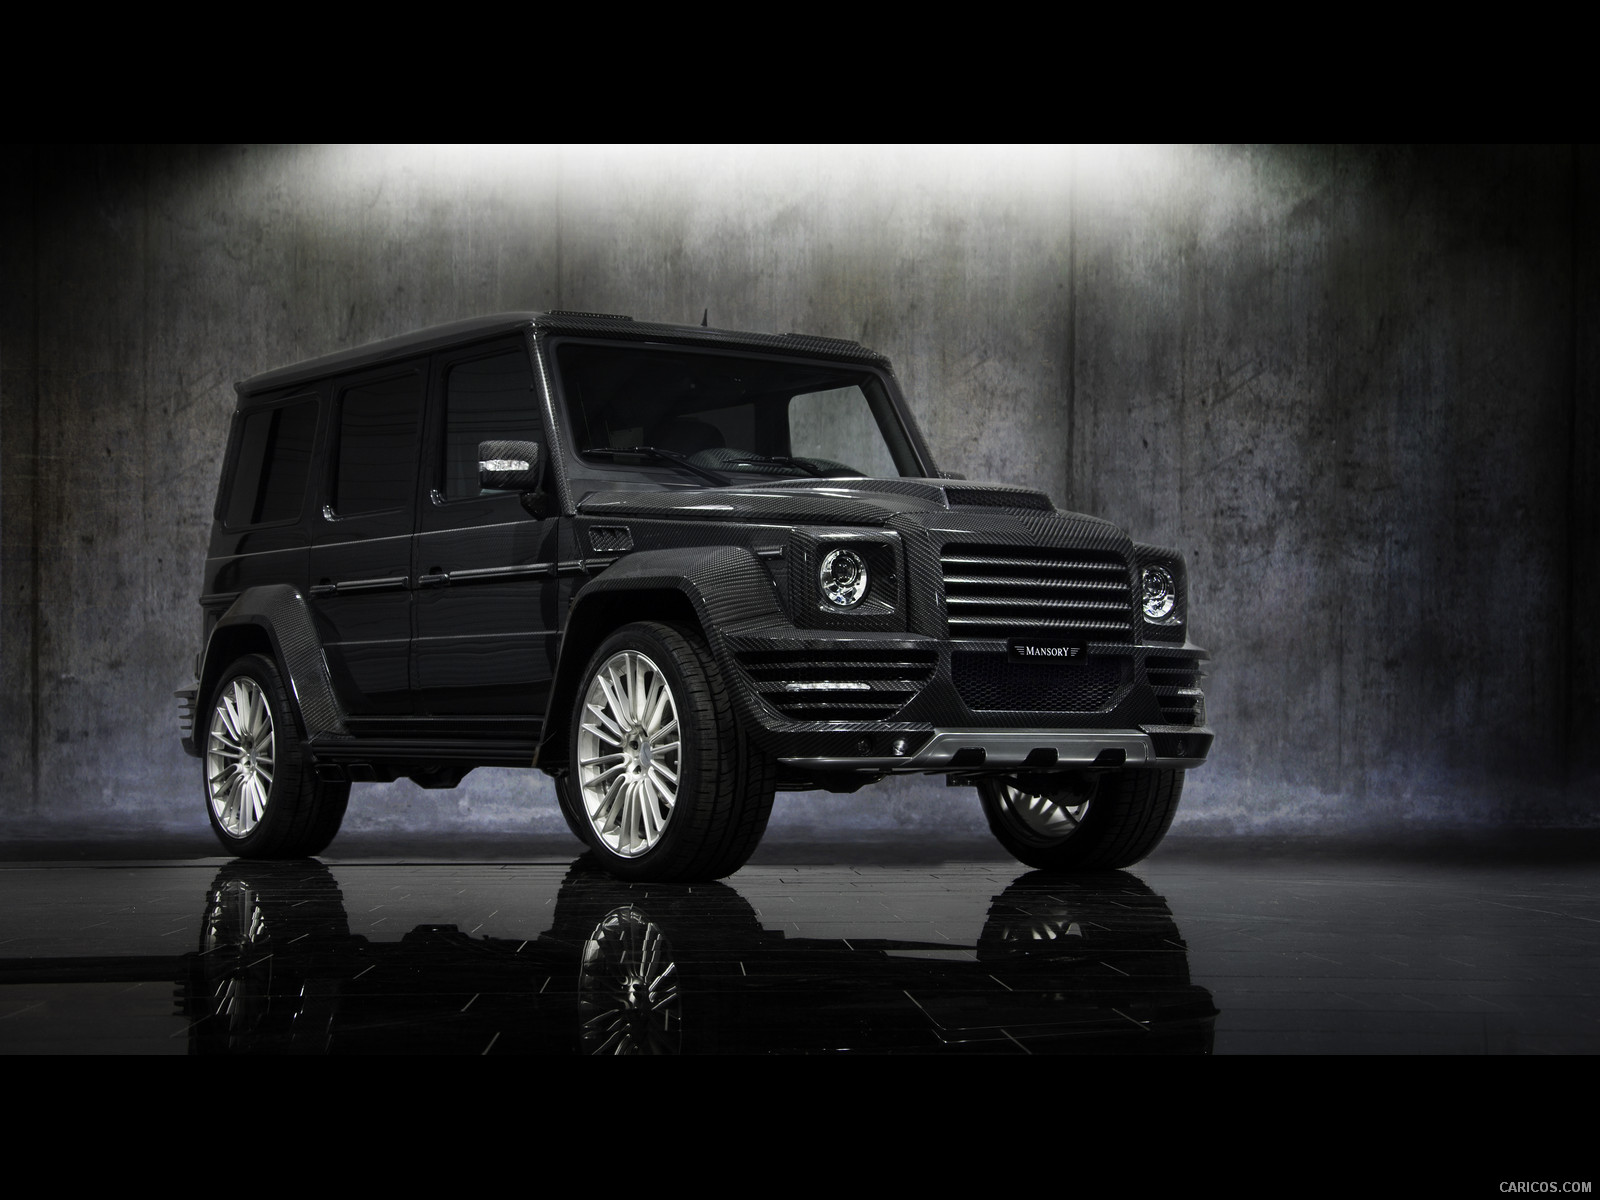 Mansory G-Couture based on Mercedes G-Class  - Front, #2 of 39